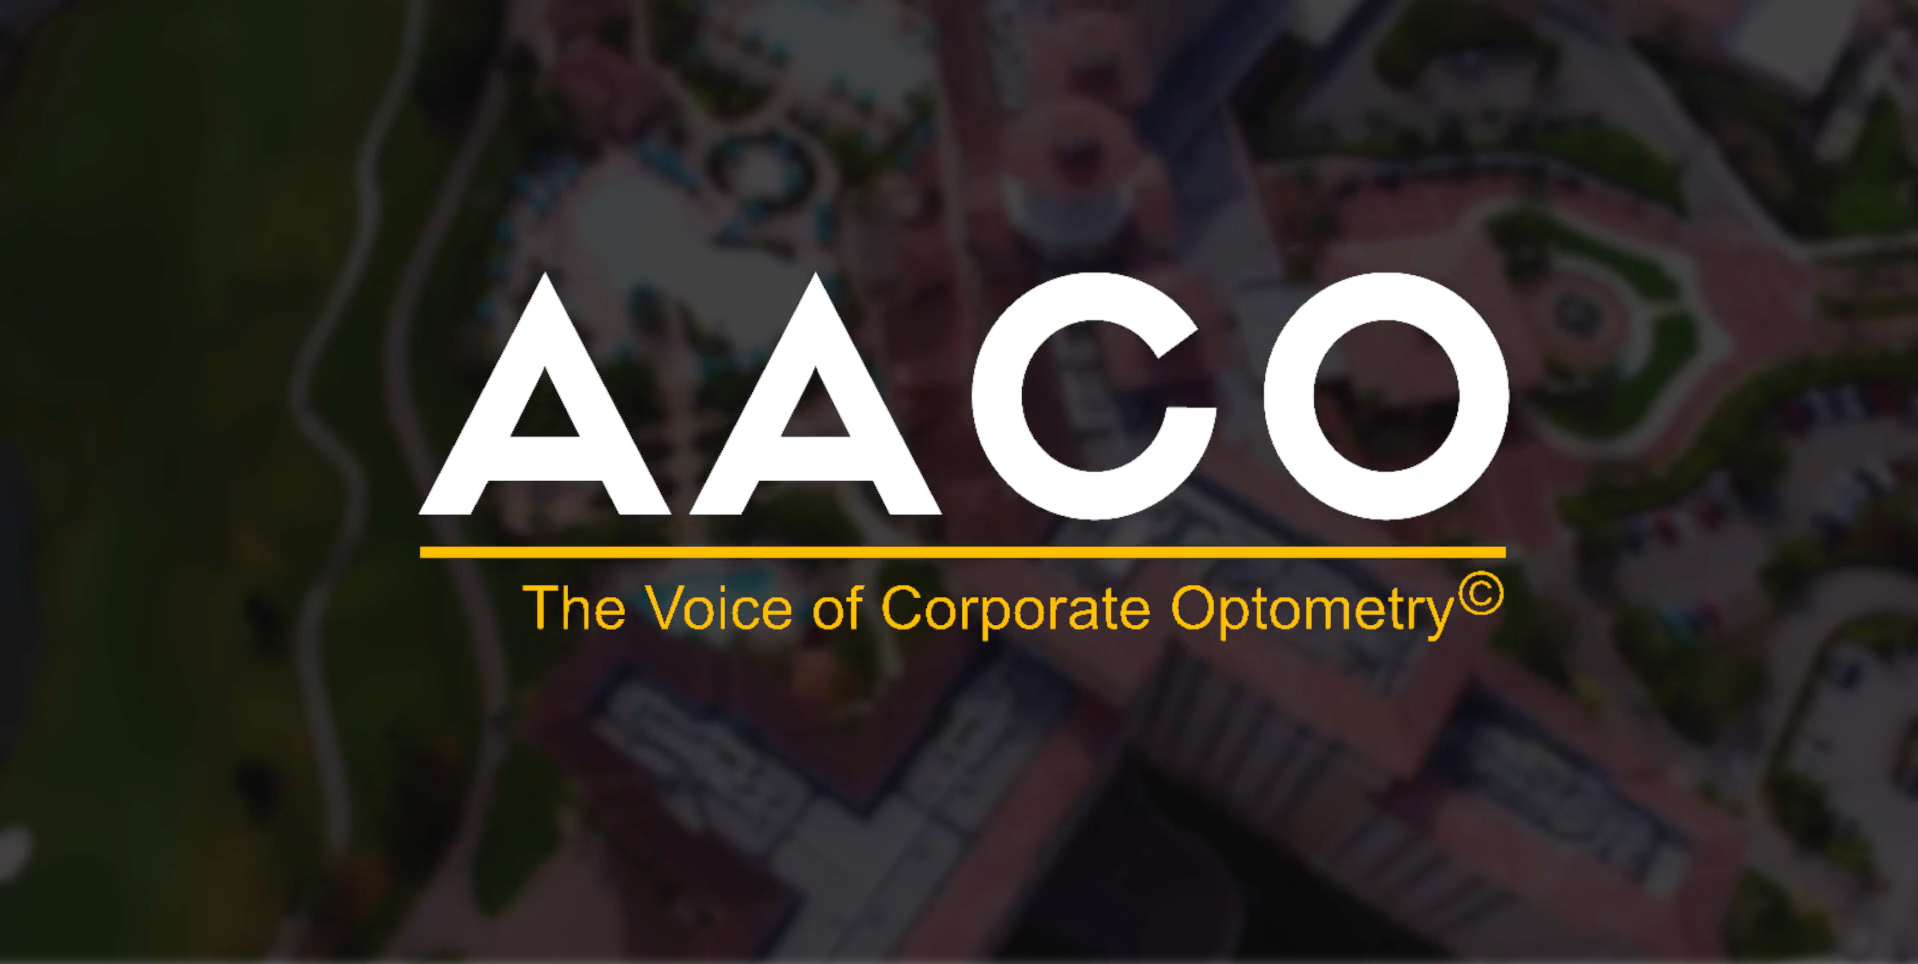 ODs gather for the 2021 AACO Annual CE Conference